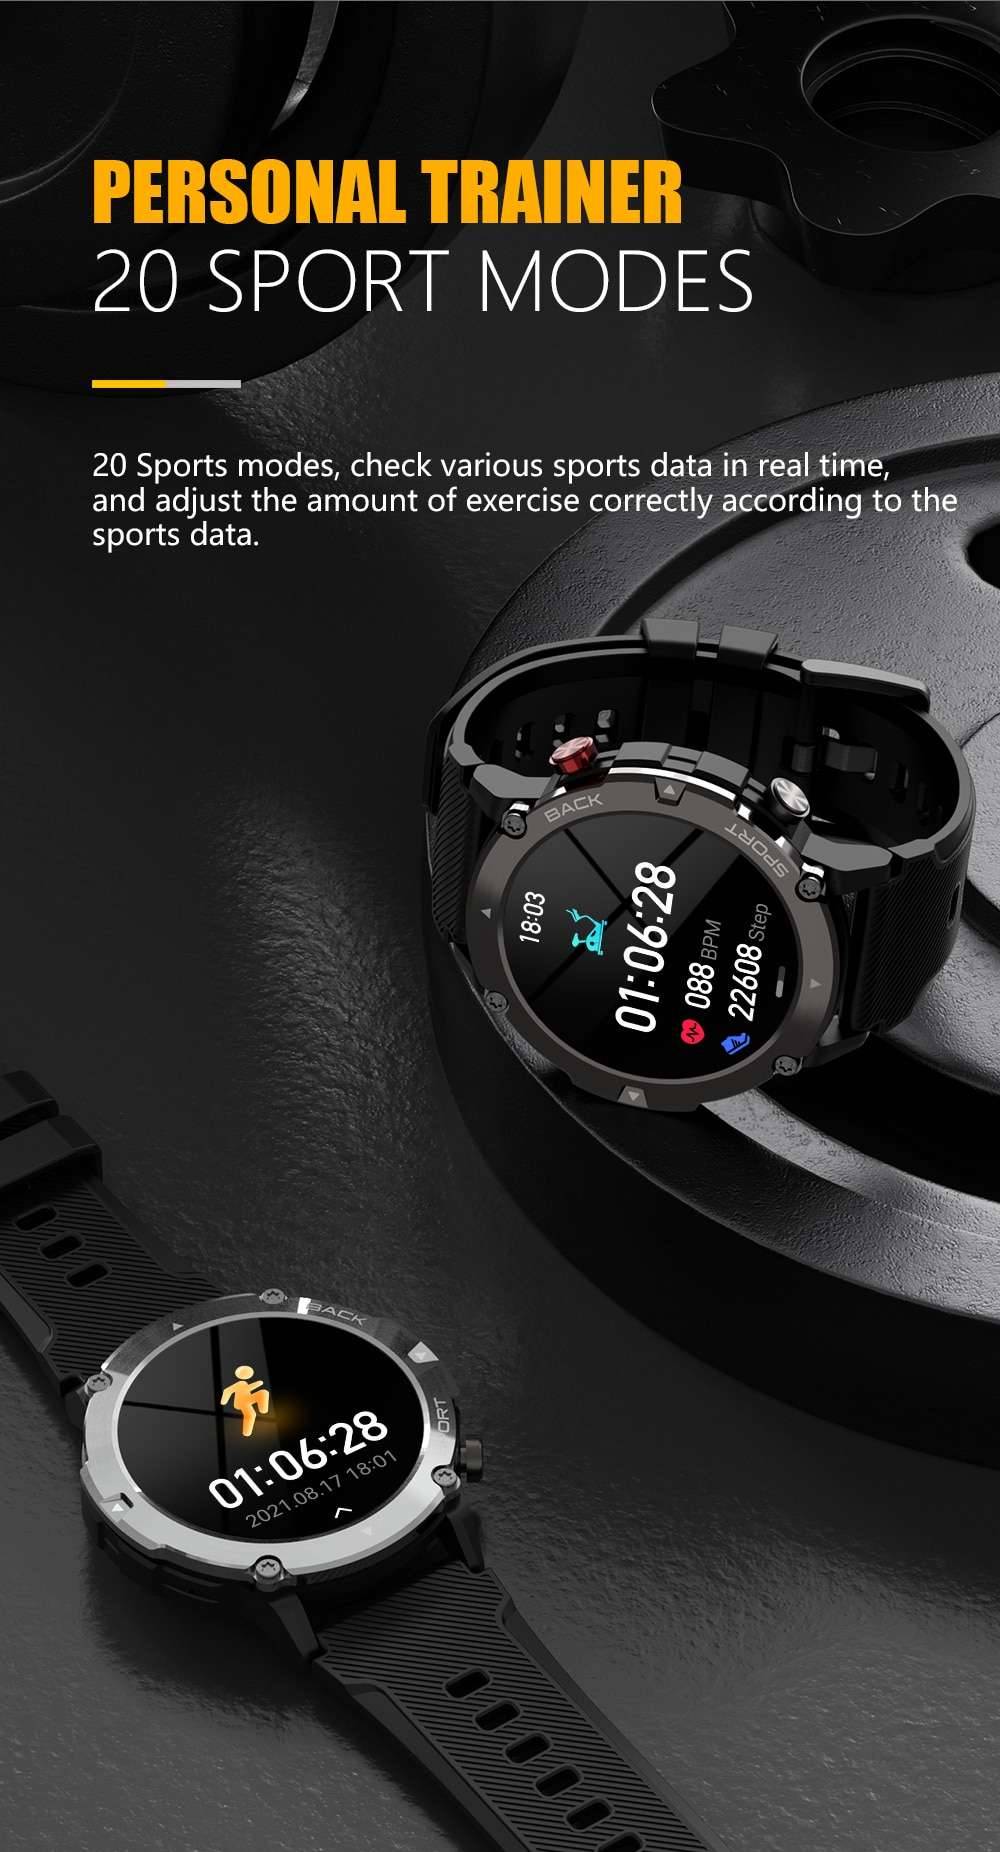 MELANDA 2022 Smart Watch Men Bluetooth Call Waterproof Multi-Sport Fitness Tracker Heart Rate Monitor Smartwatch For Android IOS Sports & Smartwatches 